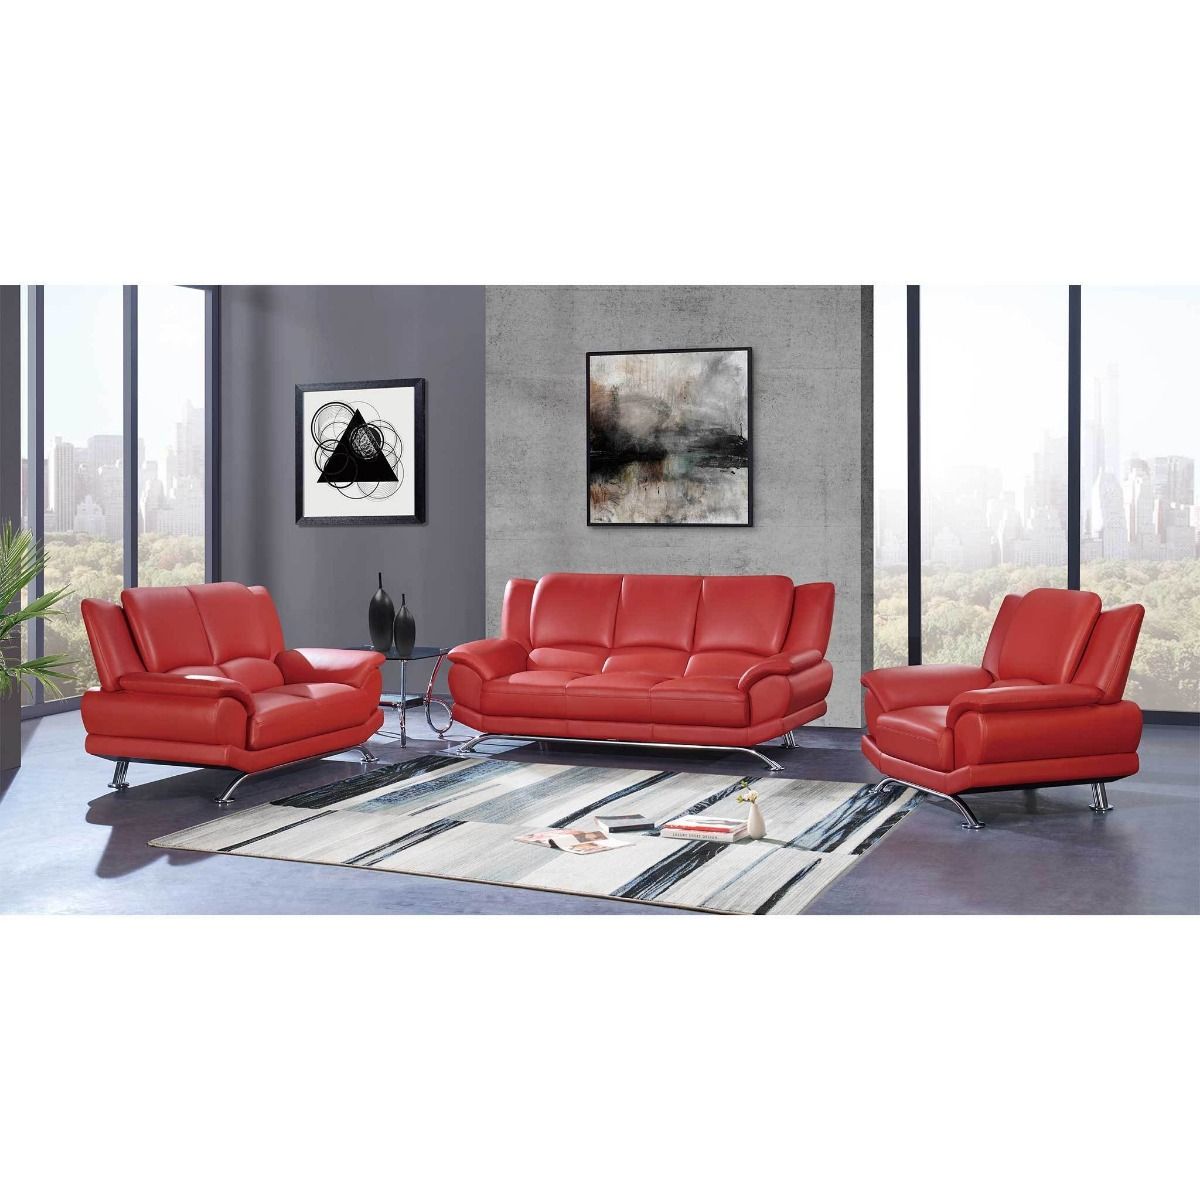 U9908 Living Room Set In Red Leather By Global Furniture Free Shipping